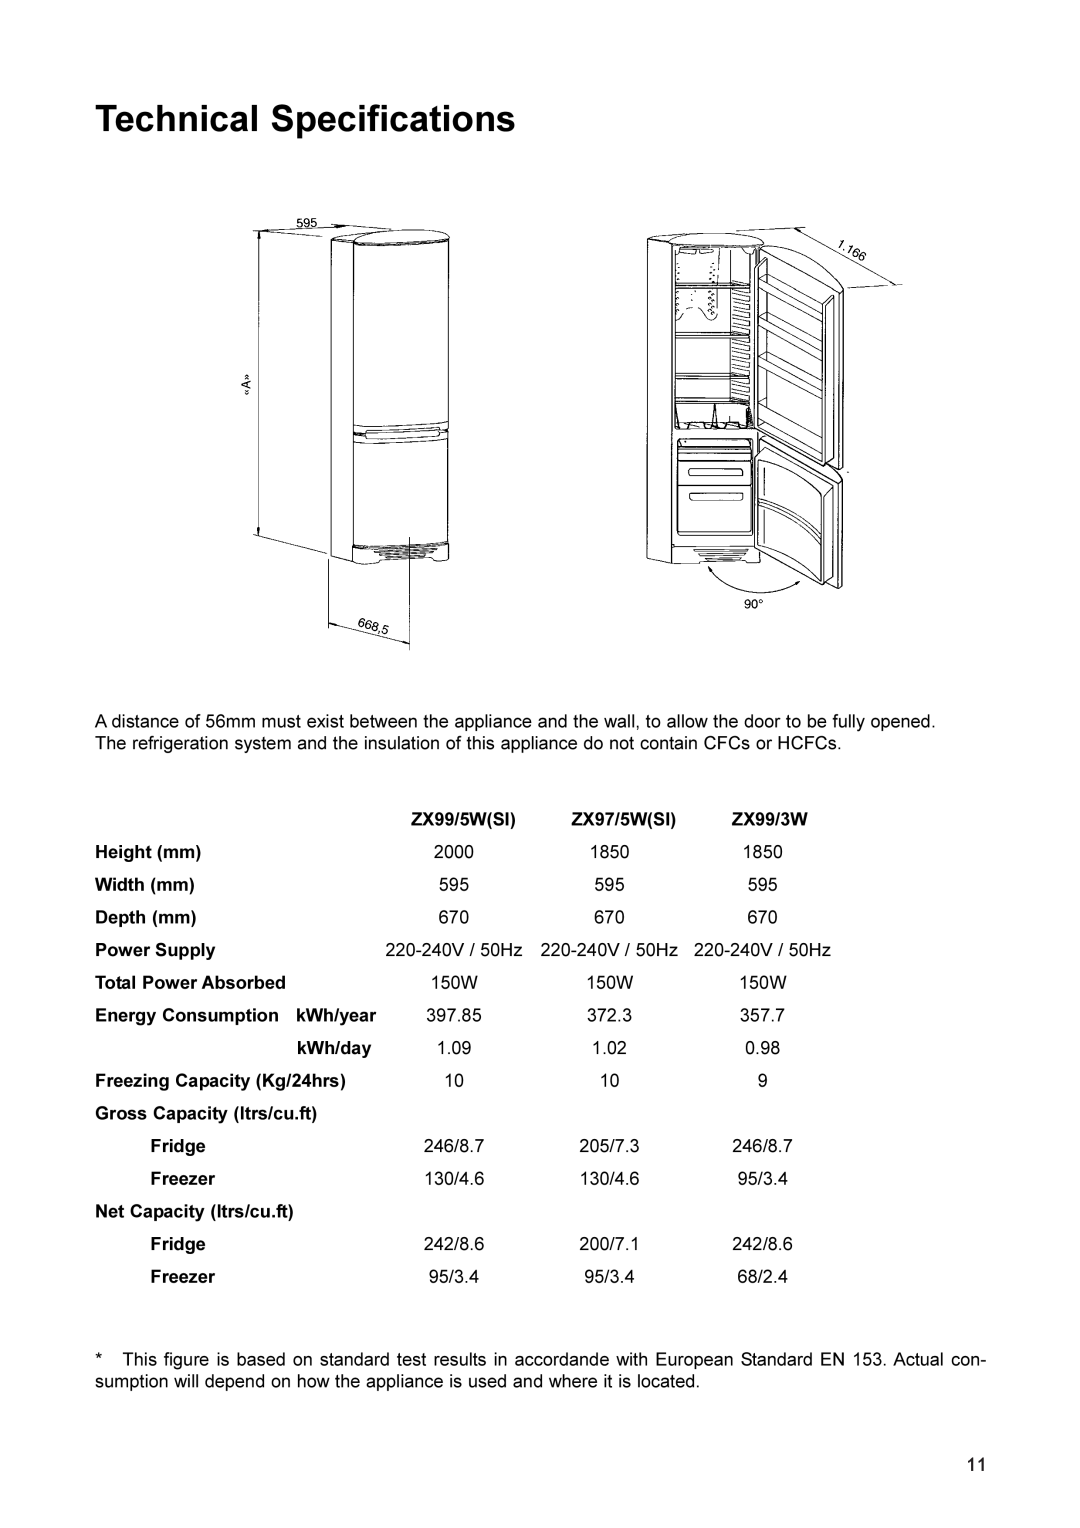 Zanussi ZX99/5, ZX99/3, ZX97/5 manual Technical Specifications 